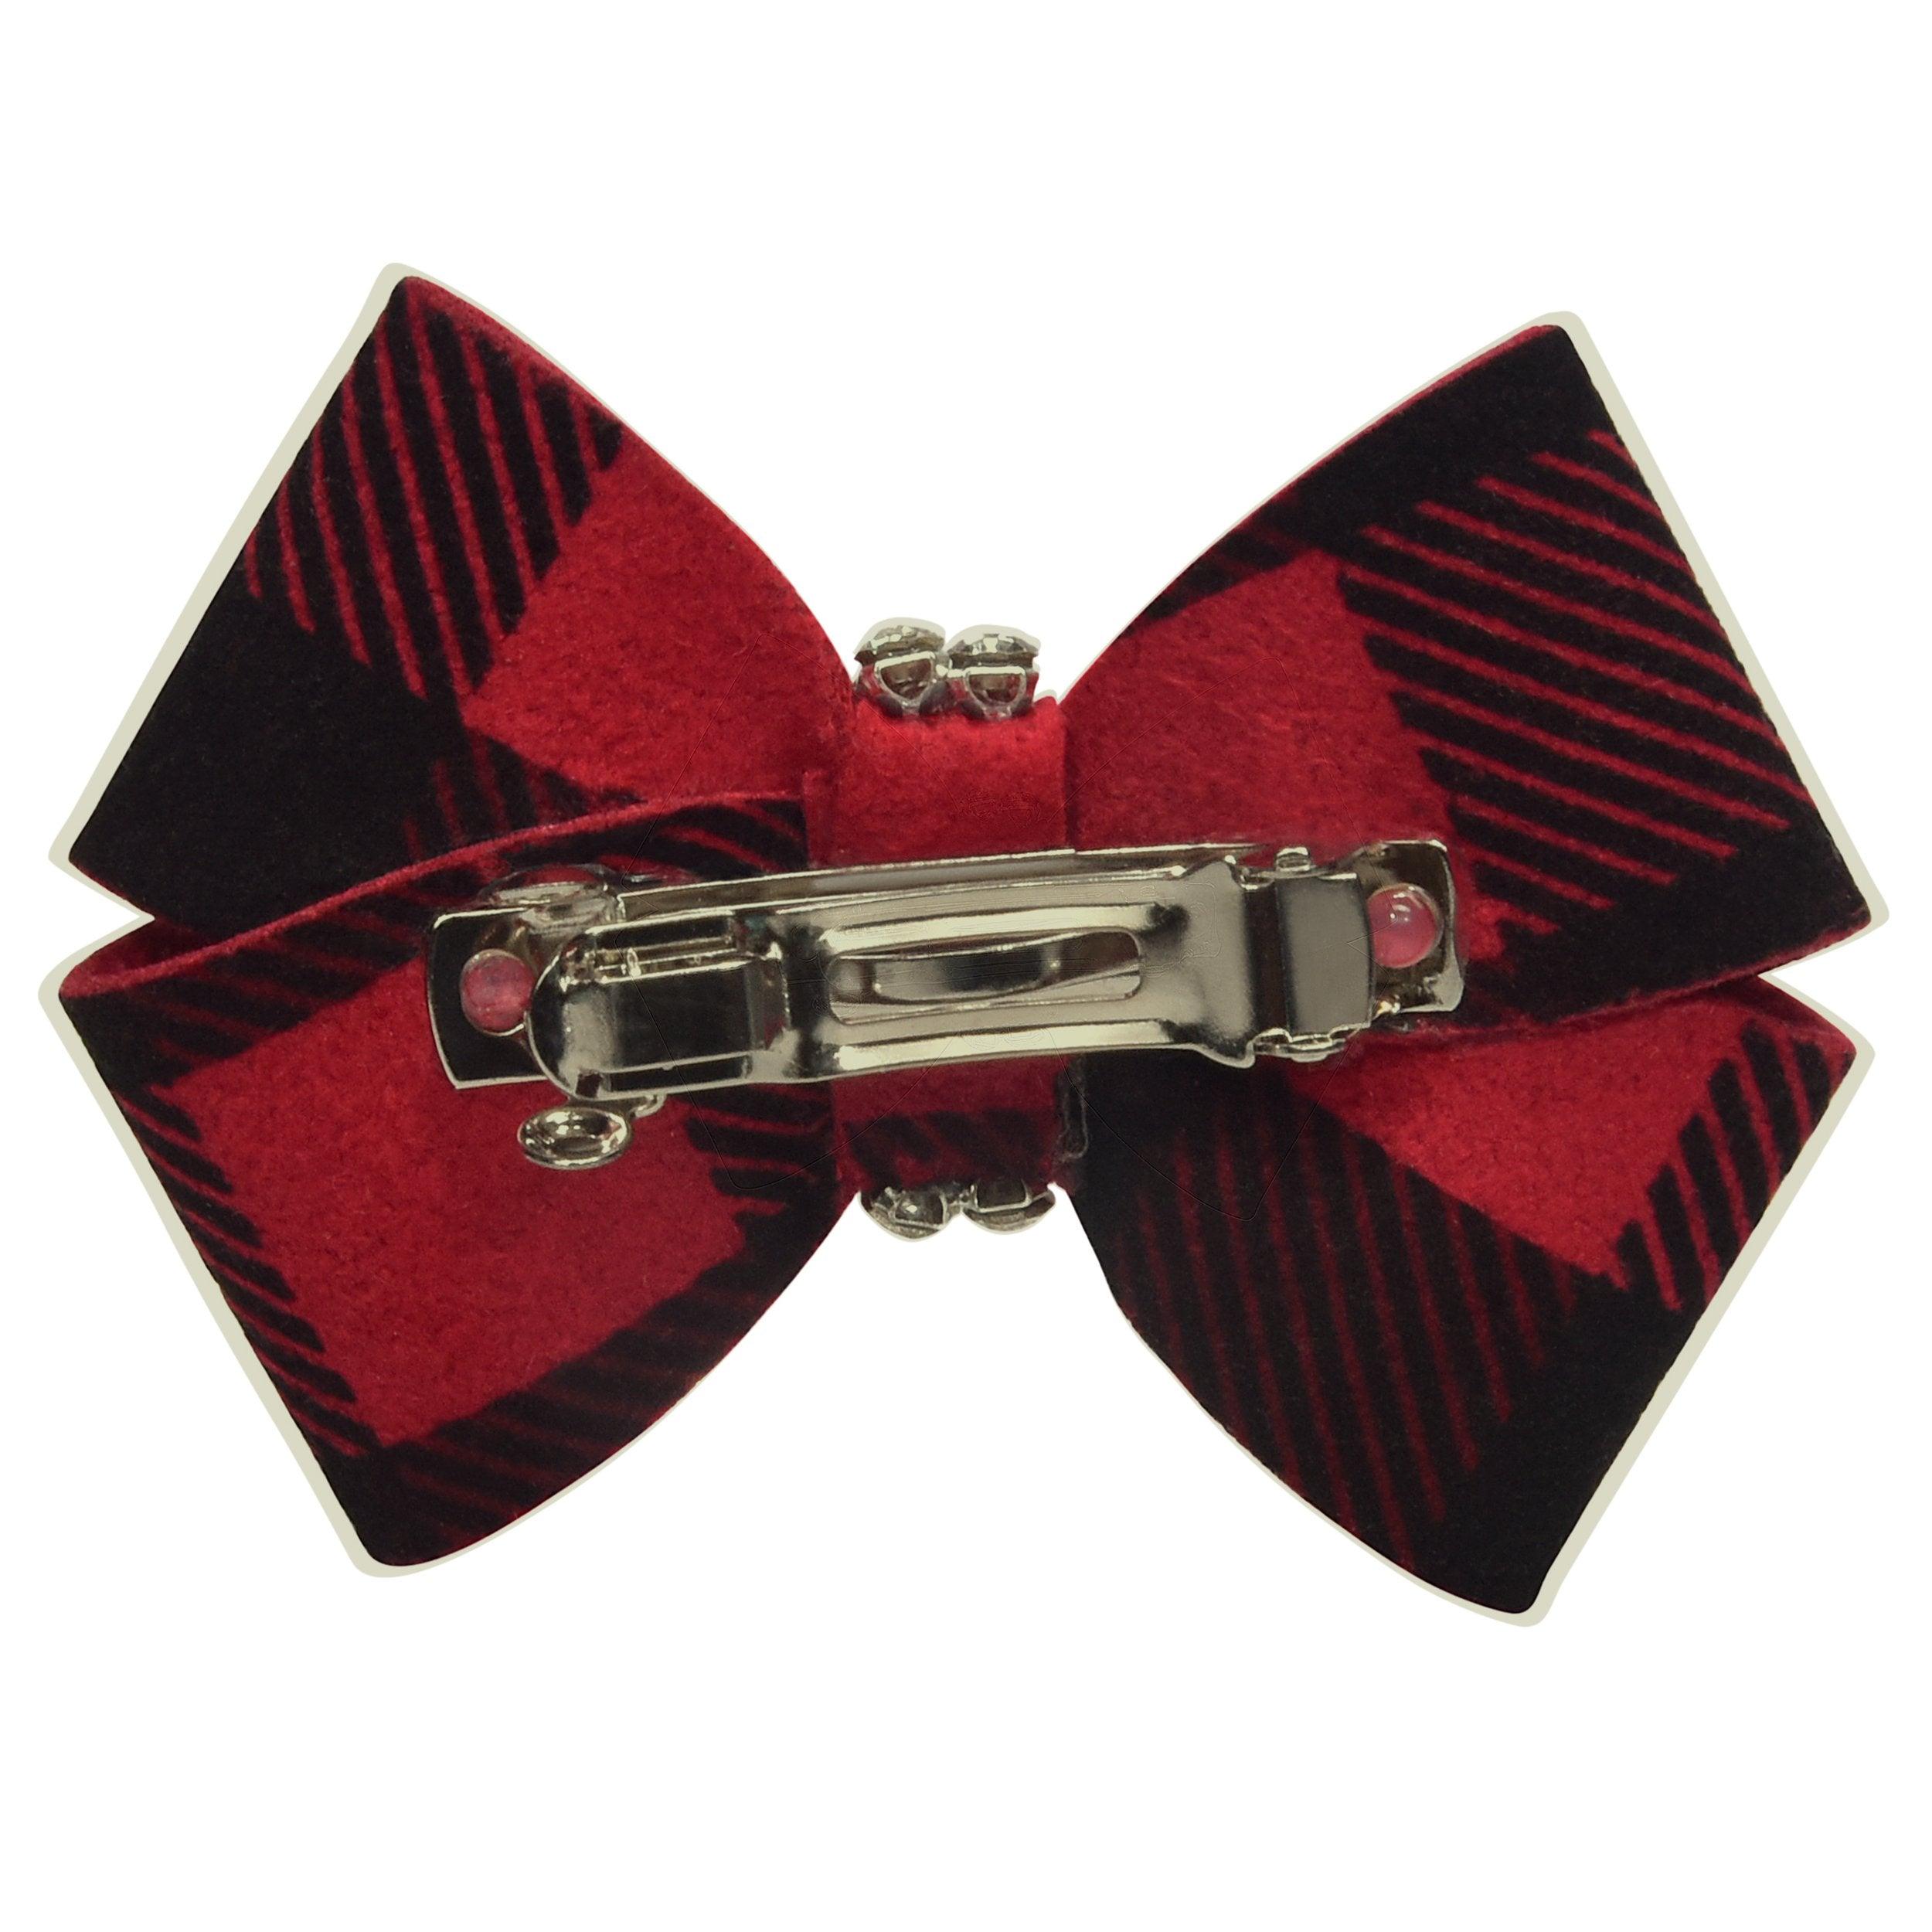 Red Gingham Nouveau Bow Hair Bow-Single - Rocky & Maggie's Pet Boutique and Salon